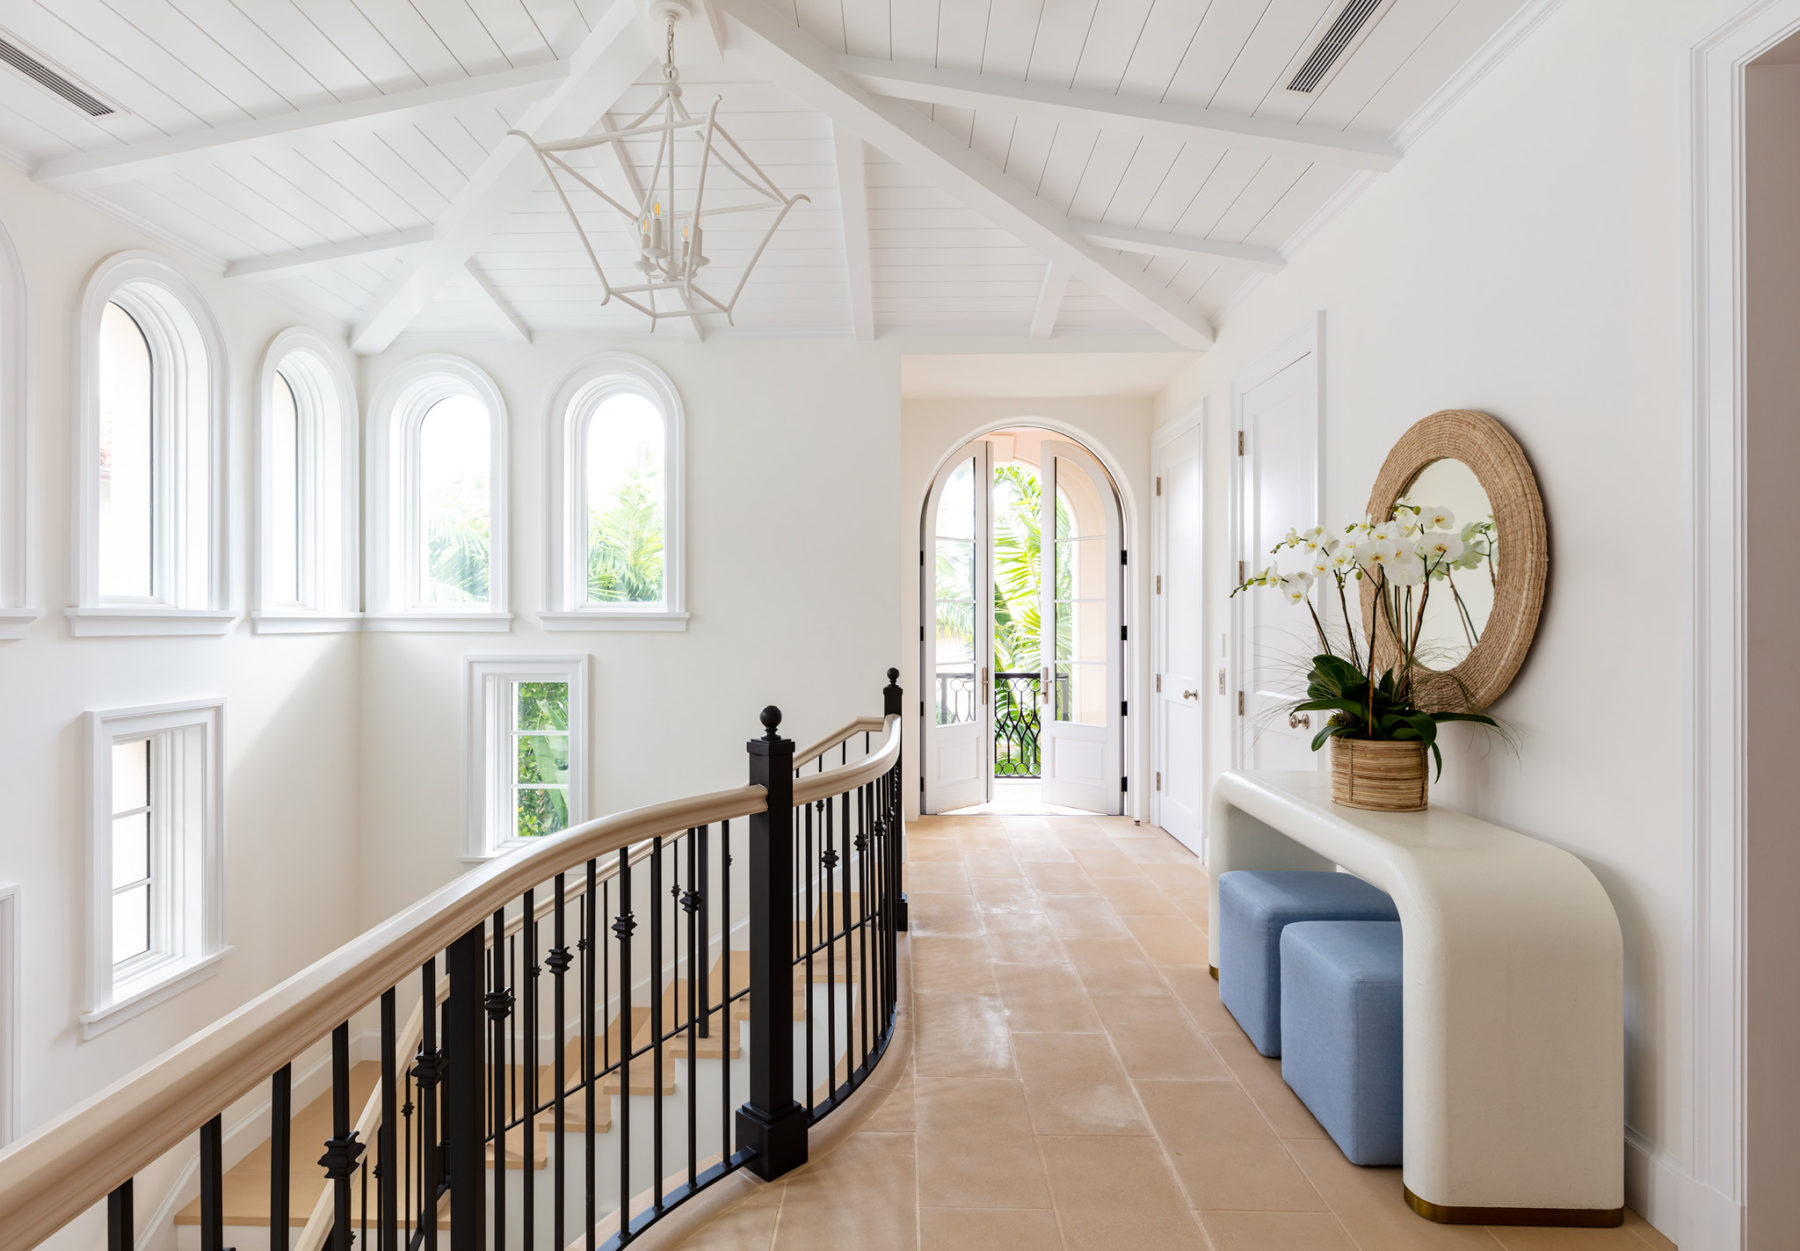 Image of Via Flagler, 1 staircase landing with arched windows